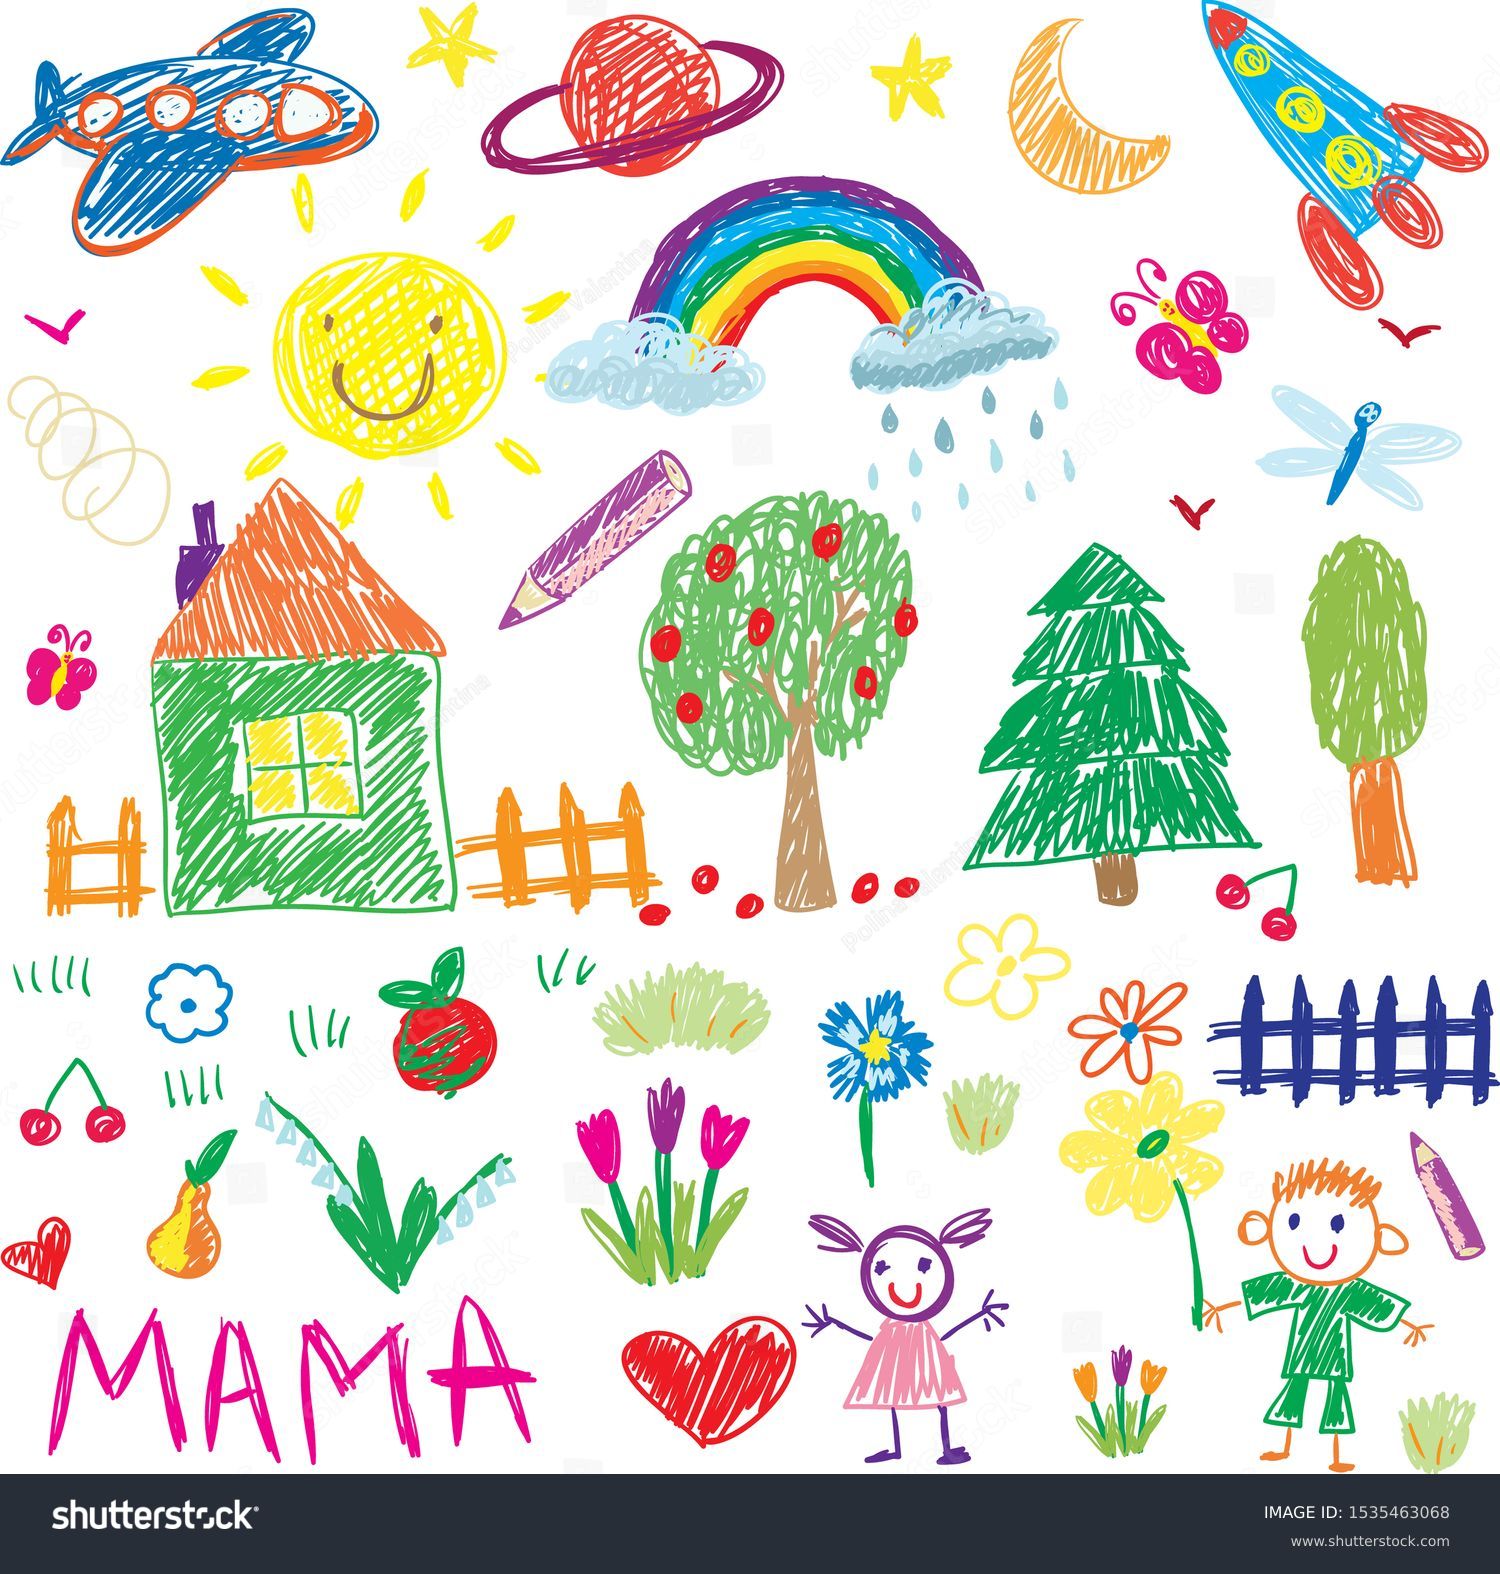 Kids drawing vector elements for kindergarten posters and banners. Children drawing style of icons. #1535463068